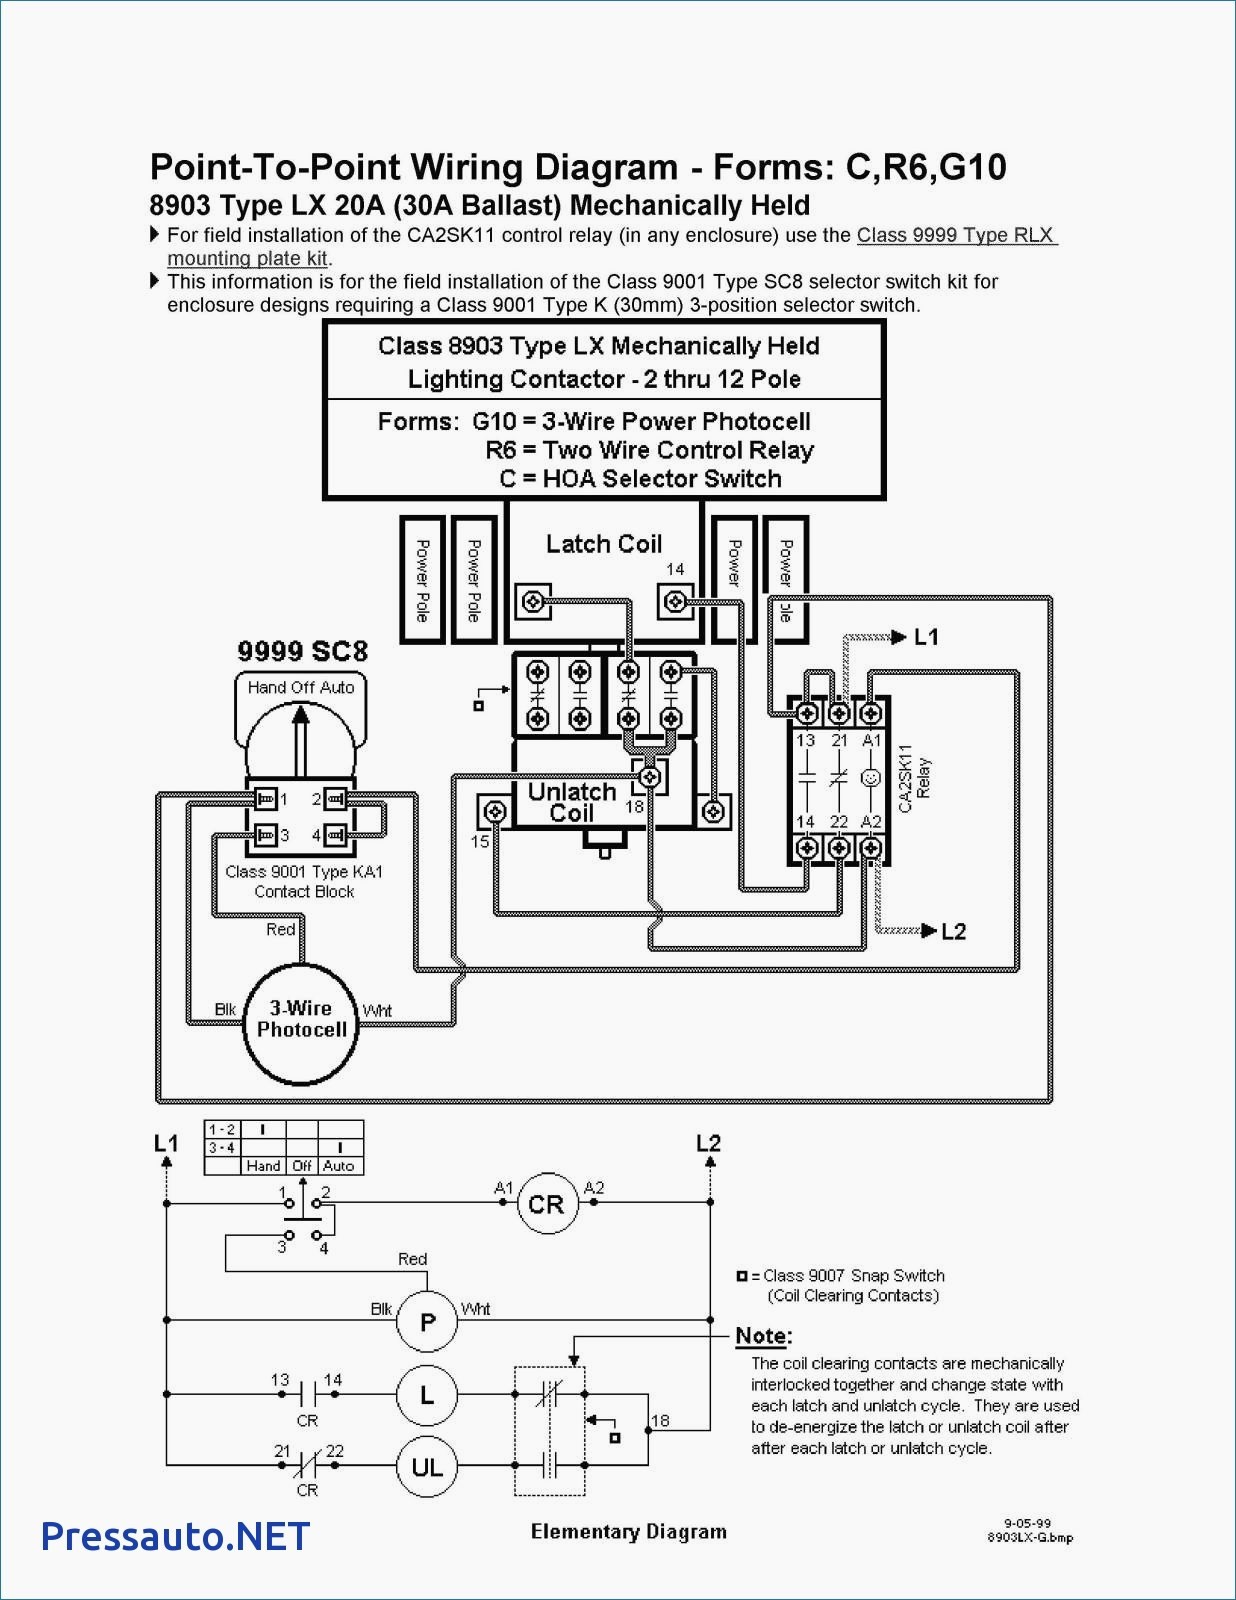 Attractive Square D Contactor Wiring Diagram Model Electrical Cutler Hammer Starter Wiring Diagram Elegant Eaton